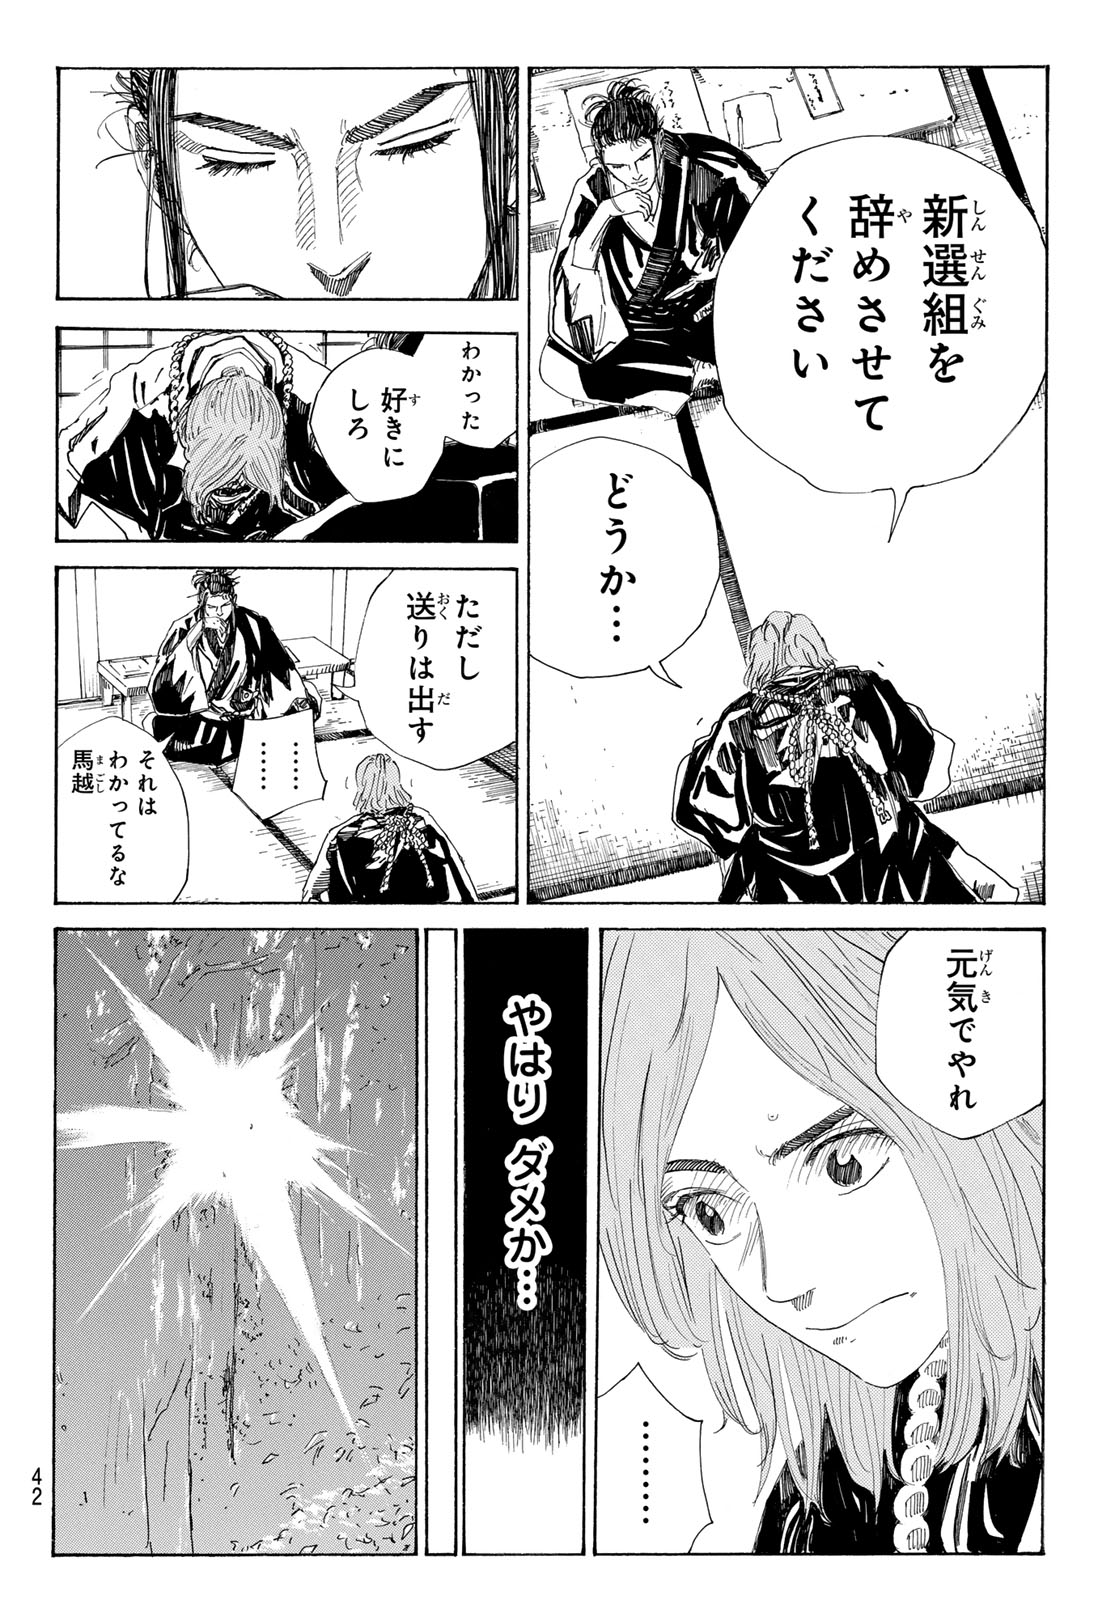 An Mo Miburo 第124話 - Page 8